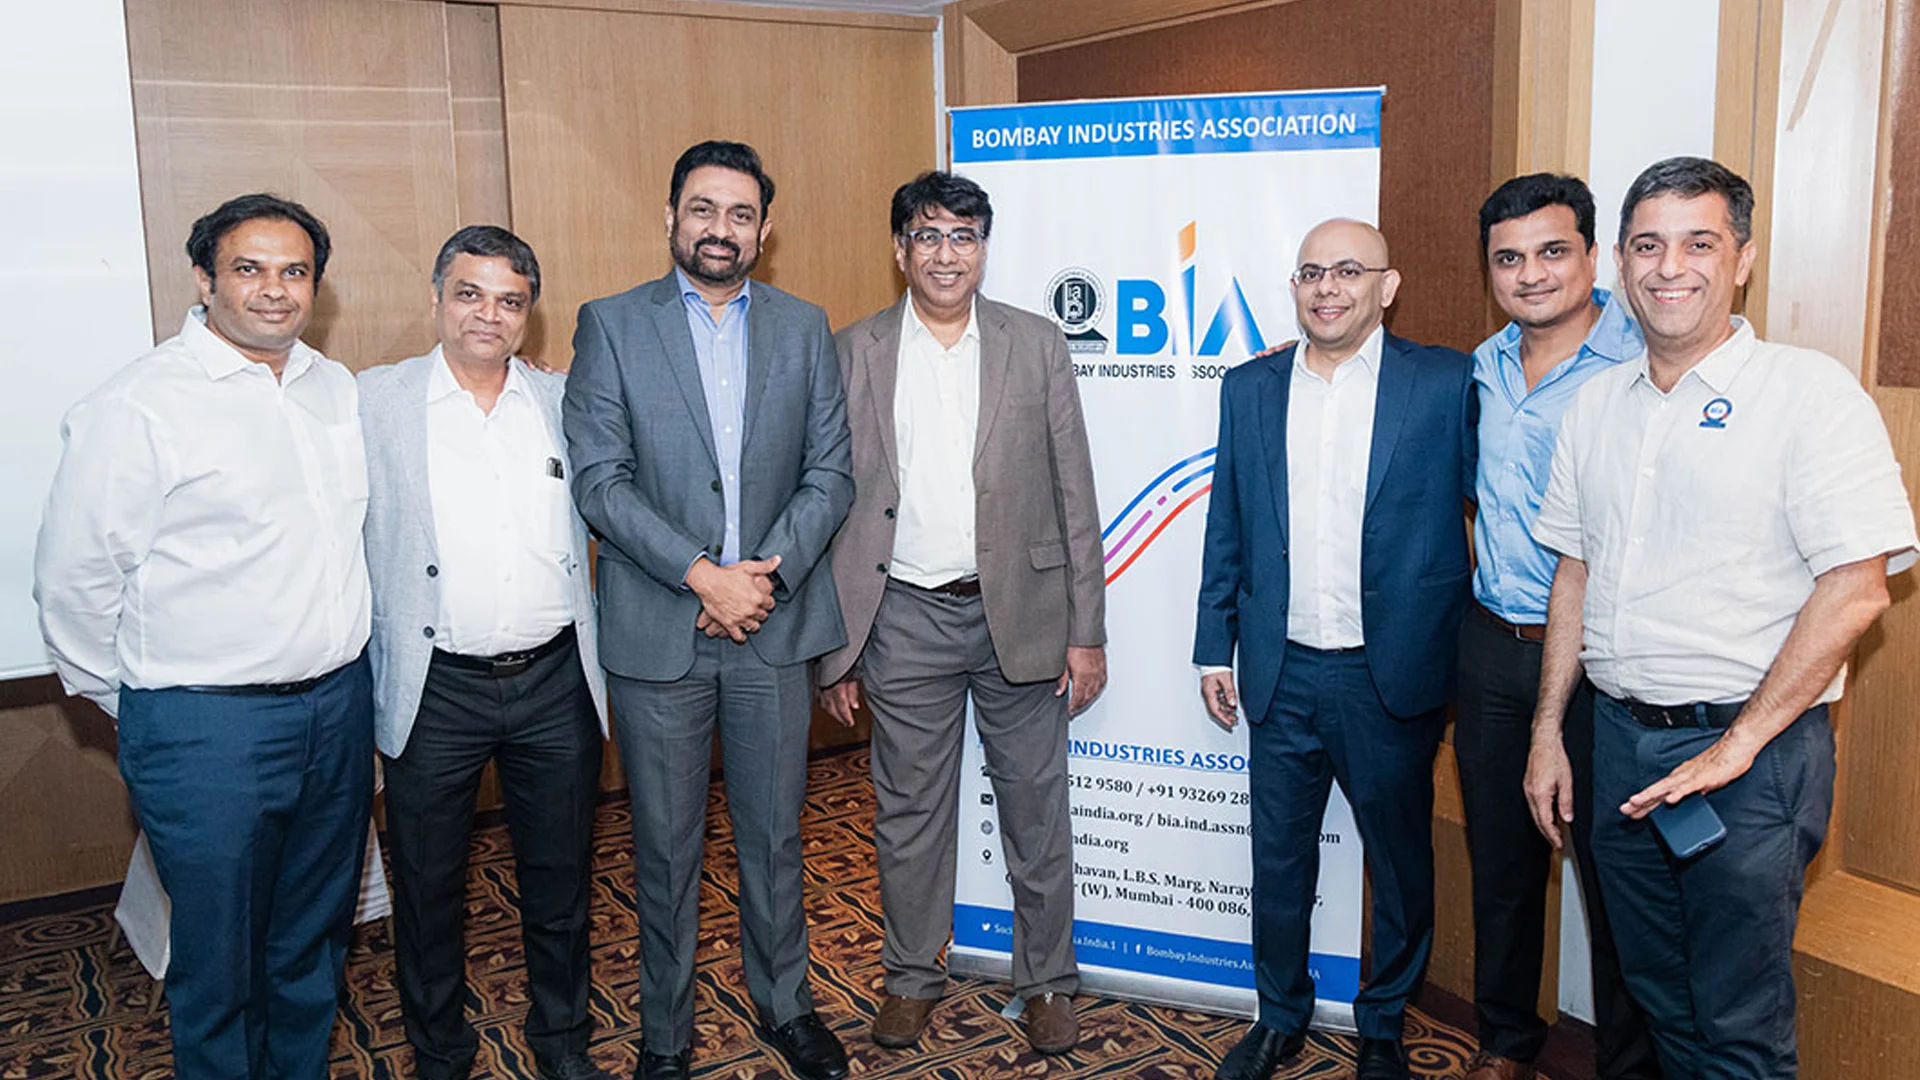 Mr. Nevil Sanghvi with BIA members at How to get 10x Rol in Startups organised by BIA